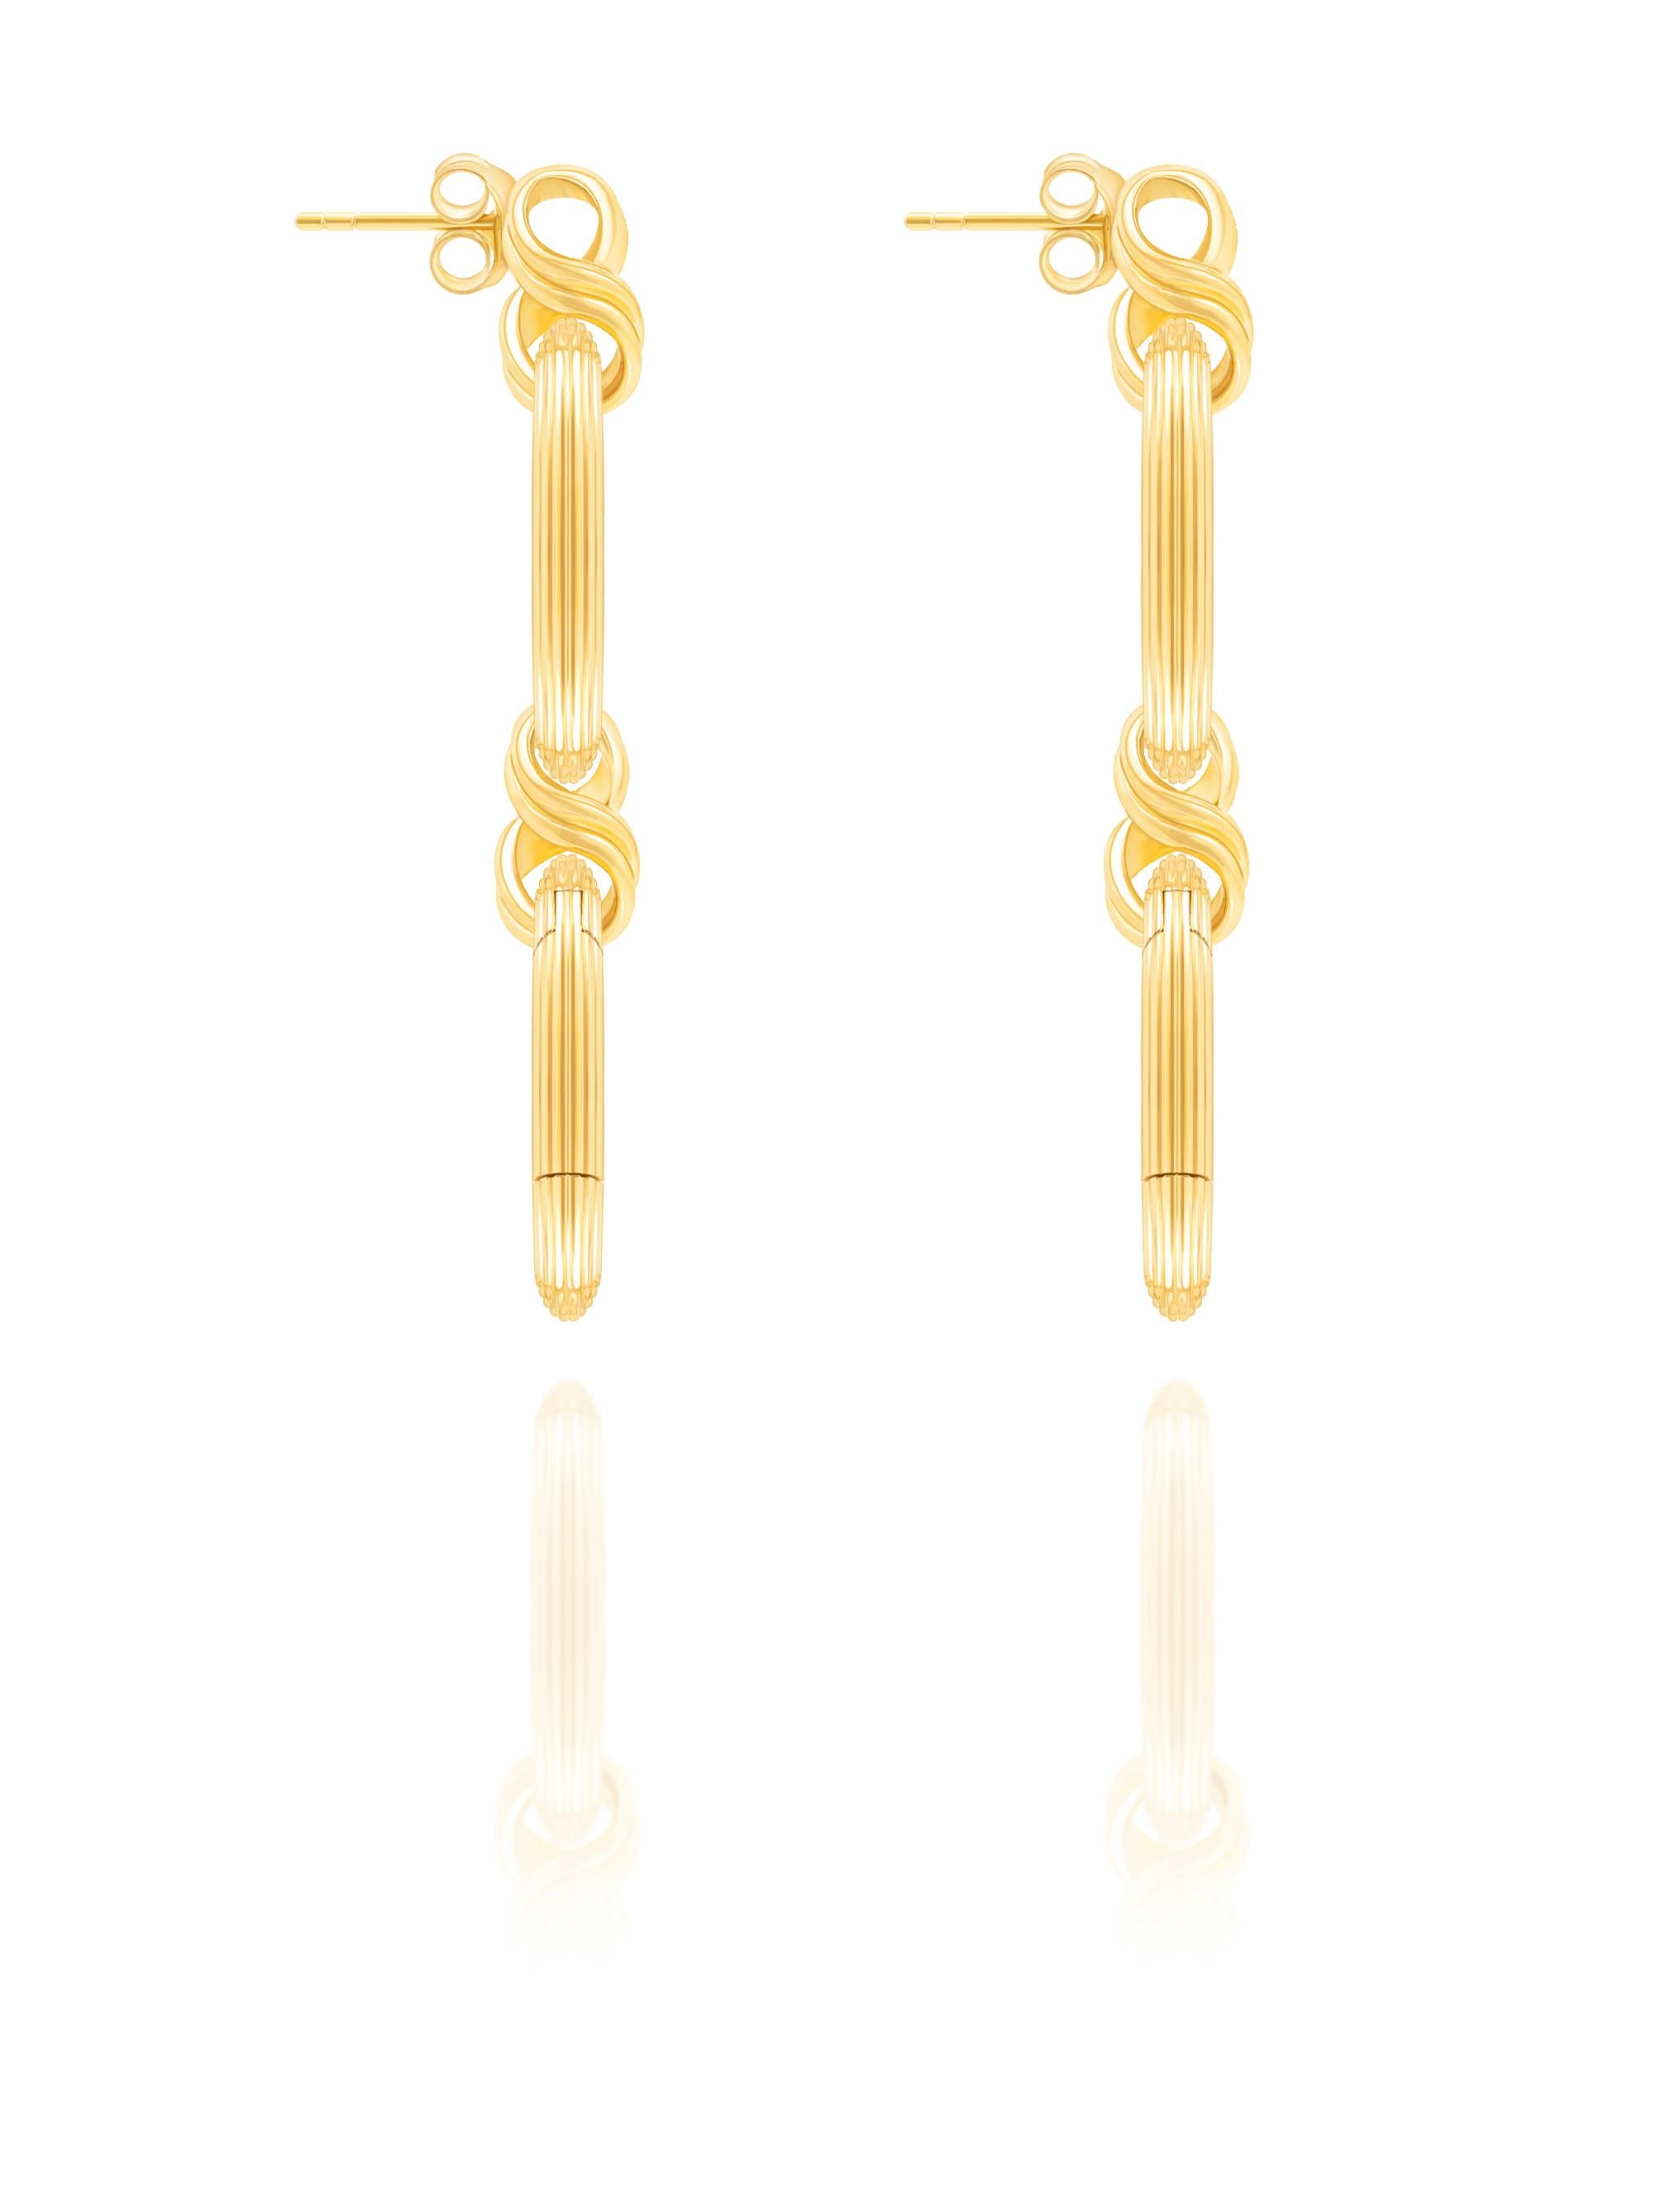 The Lustrous Kingdom Earrings - A Love Affair Collection

Adorn your ears with the matching earrings to the Lustrous Kingdom necklace. Our revolutionary adjustable matching chain link design introduces a new sustainable approach to customizing